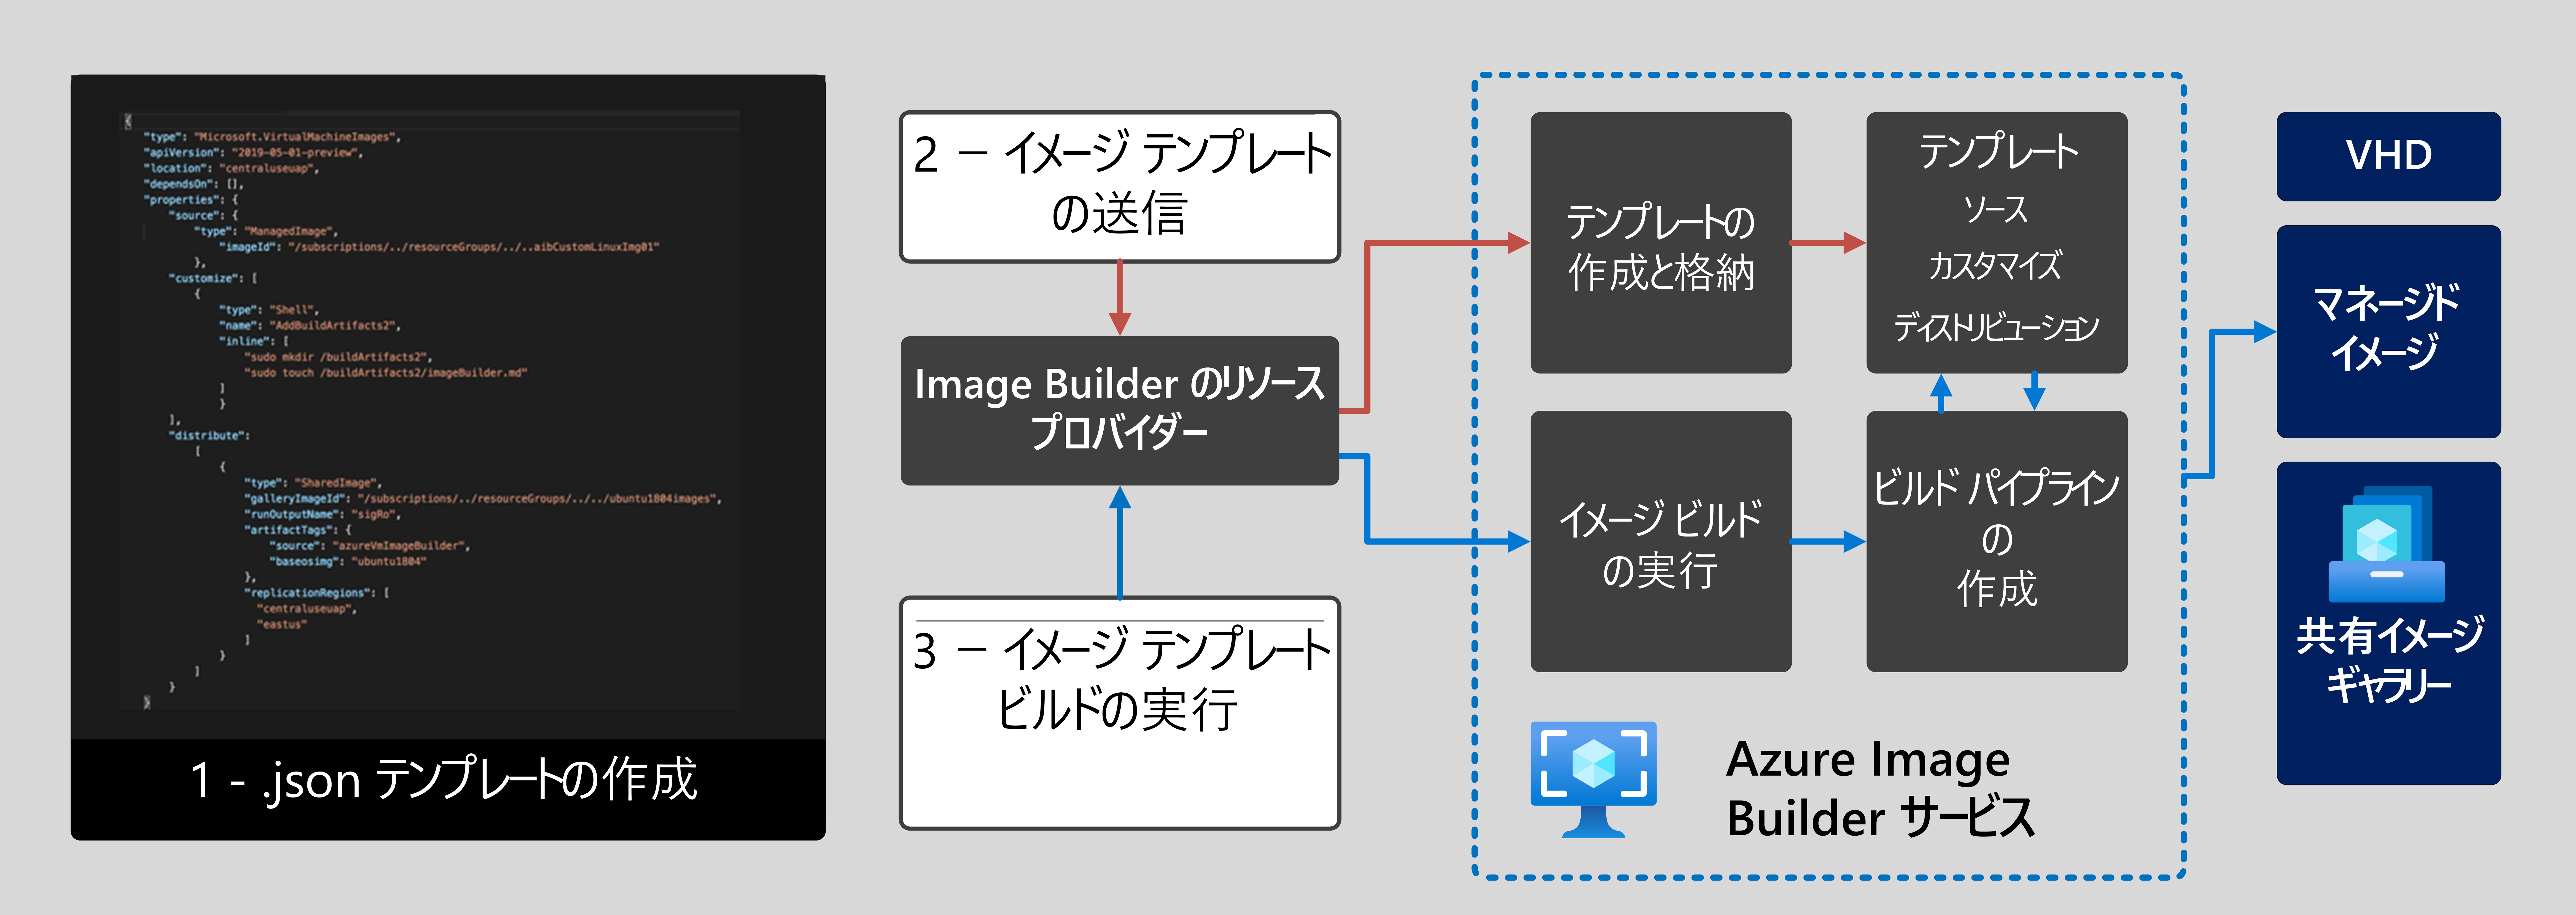 A diagram with the Azure Image Builder components, and the process of creating images with Azure Image Builder as described in the preceding text.